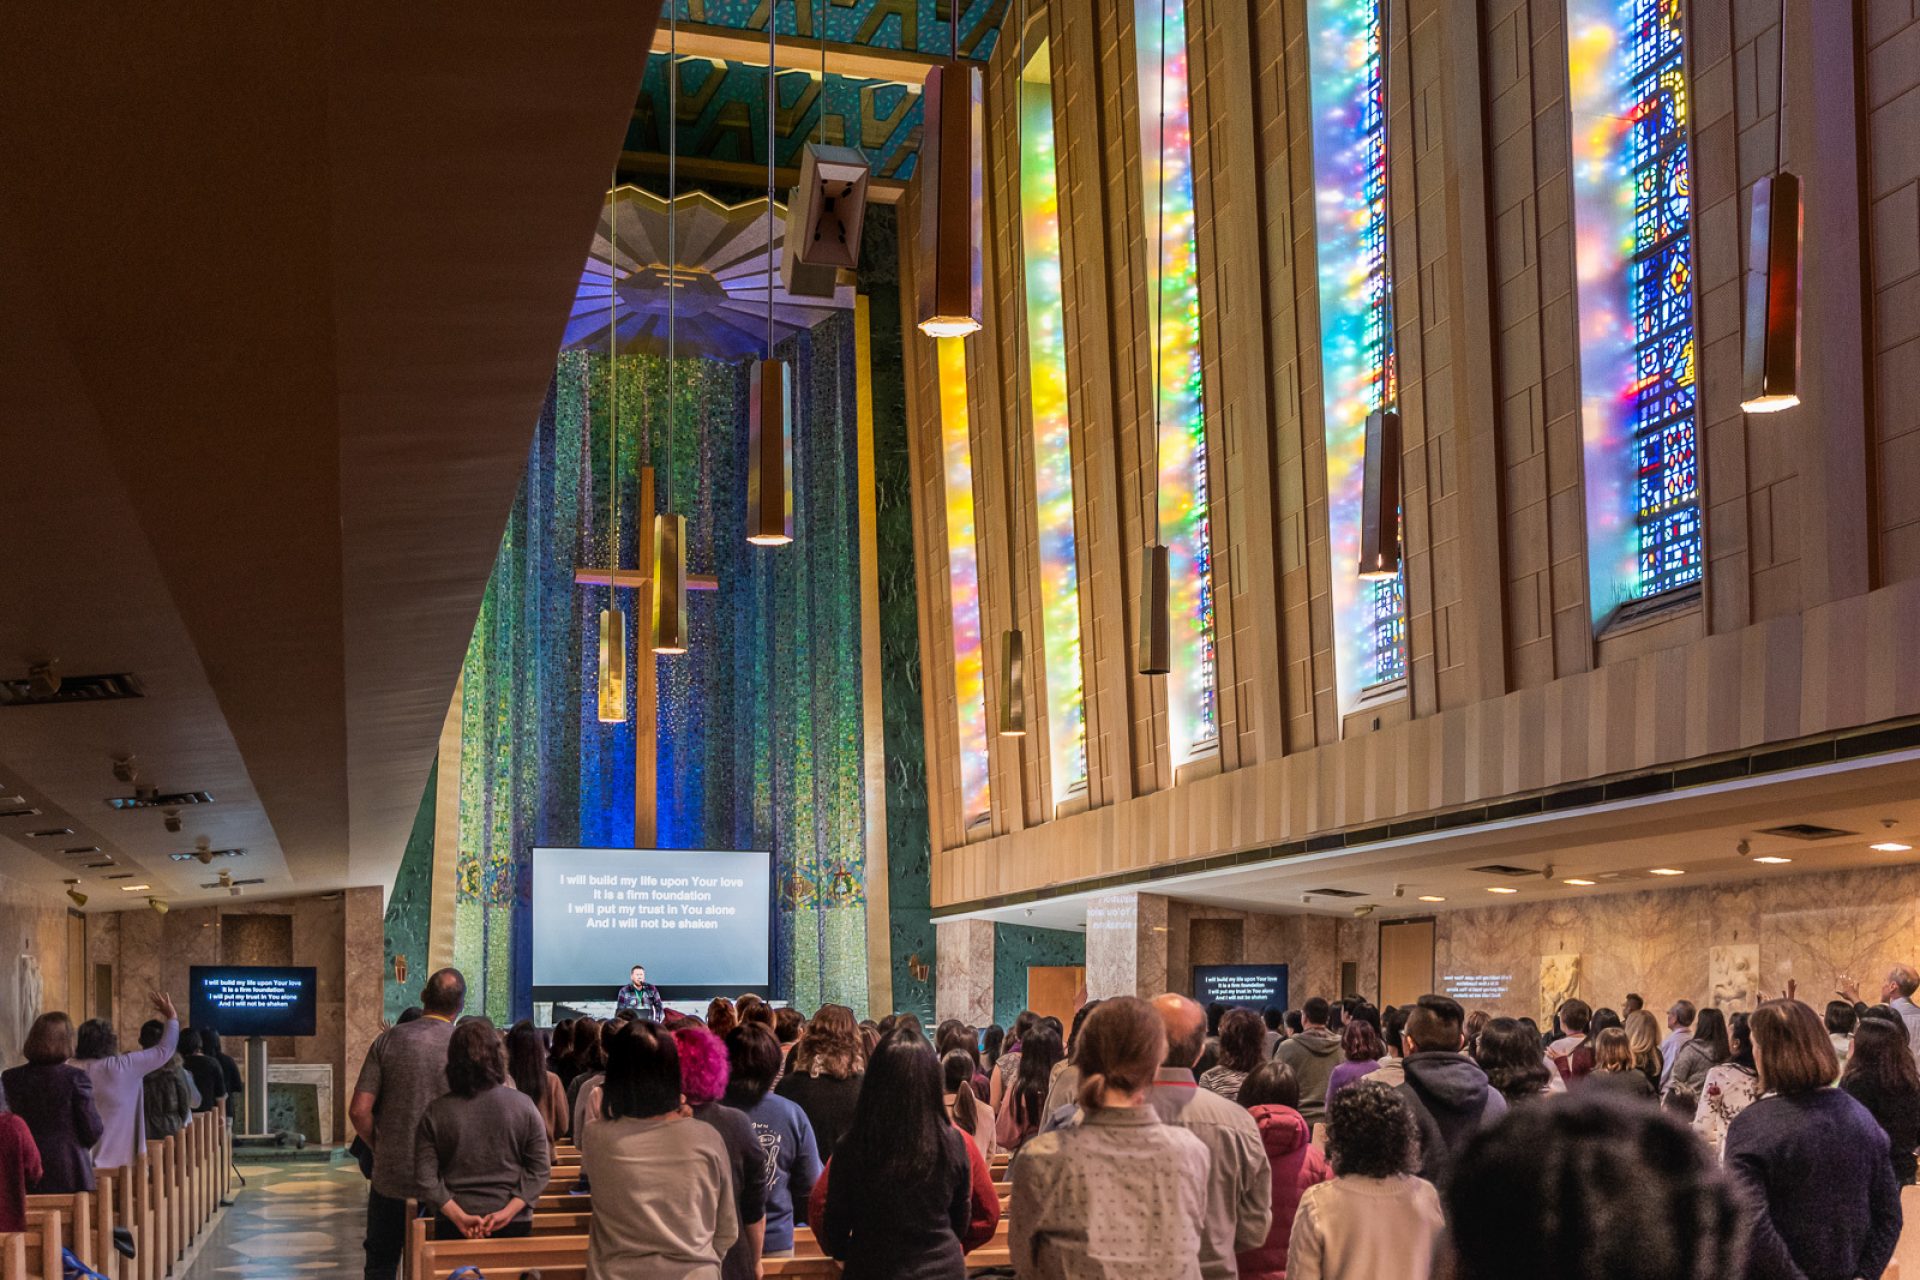 Light pours through stained-glass windows in a large chapel as a man leads a large congregation in worship